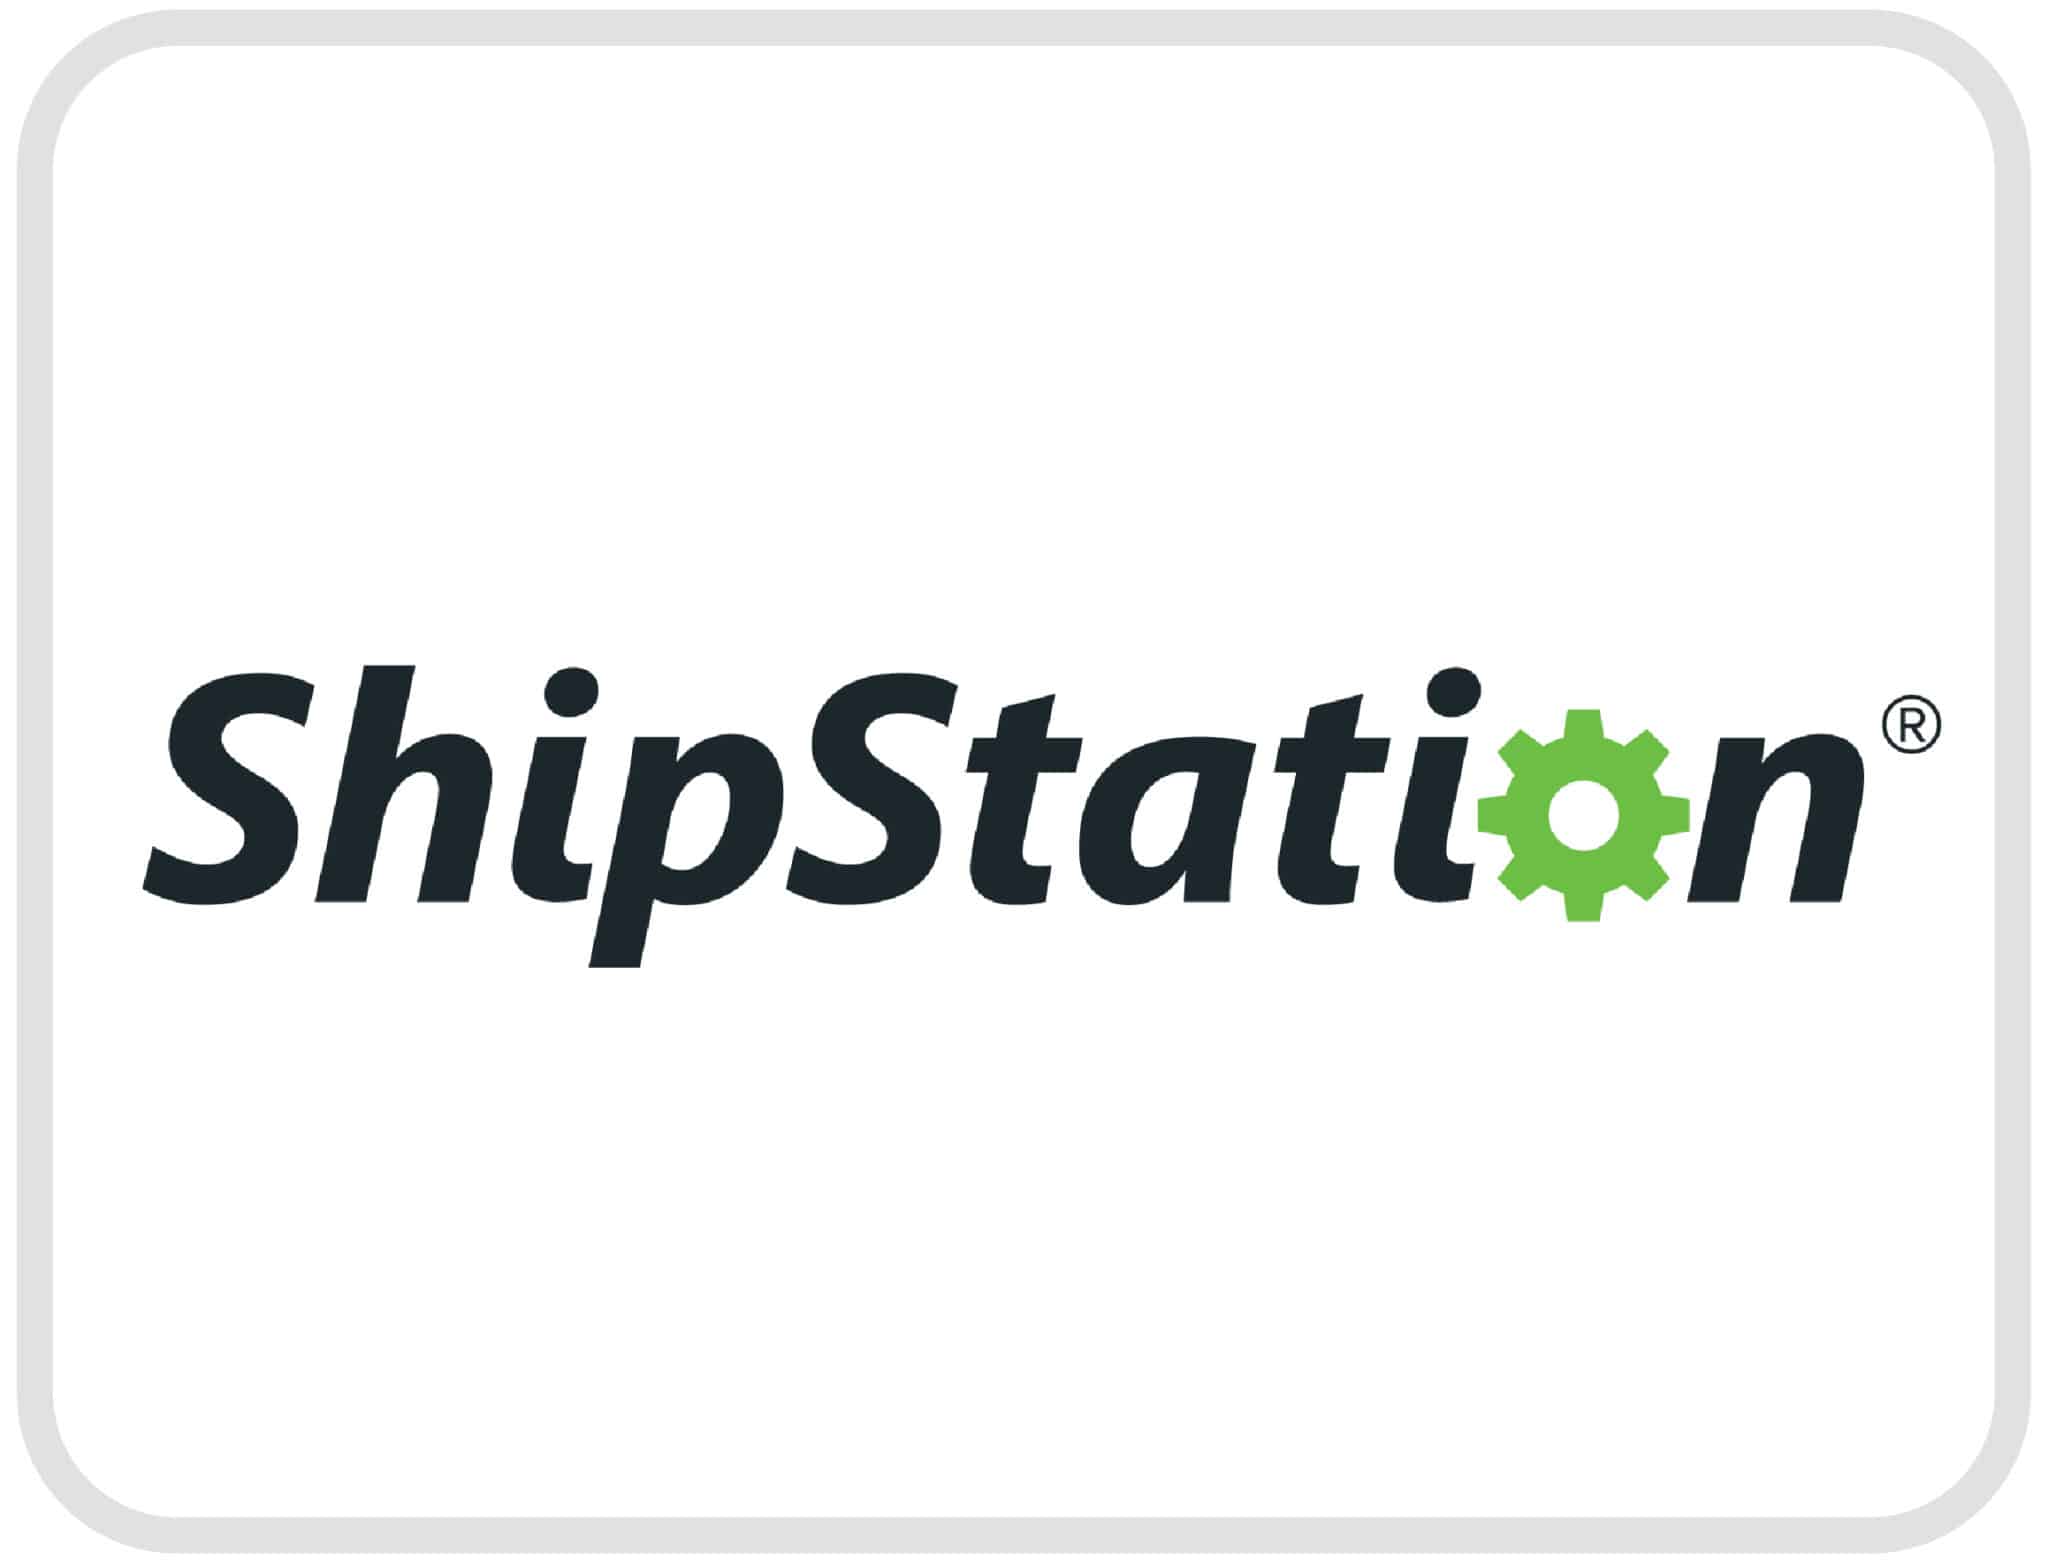 This is the ShipStation logo